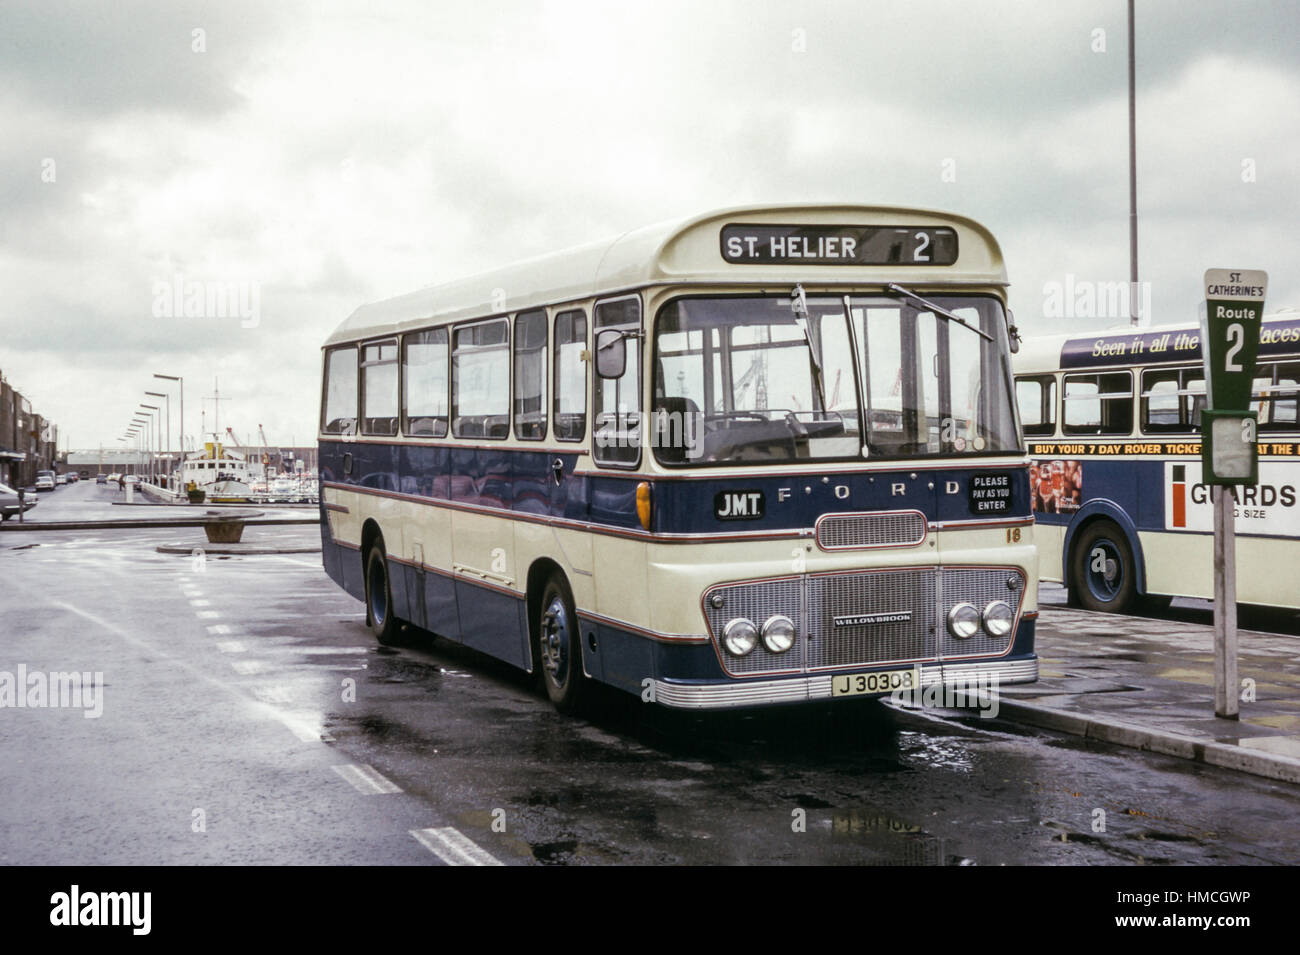 Jersey, Channel Islands - 1973: Vintage image of bus in St Helier, Jersey.  Jersey Motor Transport Ford R192 Willowbrook 18 (registration J30308 Stock  Photo - Alamy